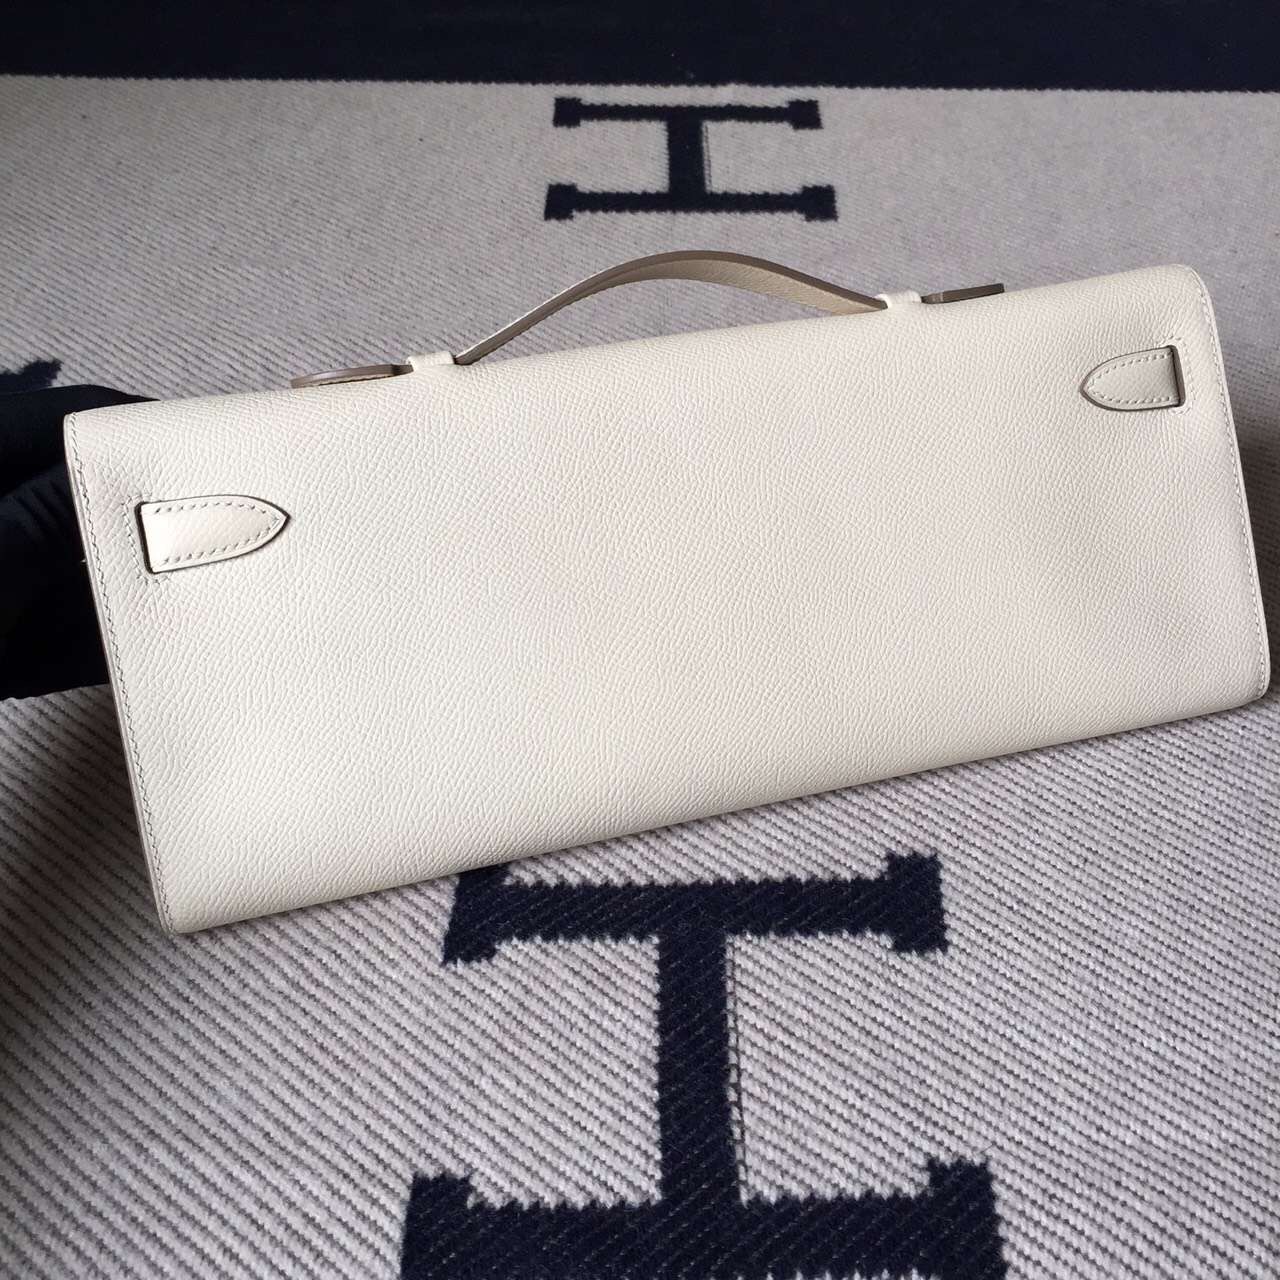 Discount Hermes Kelly Cut Clutch Bag in CK10 Carie White Epsom Leather